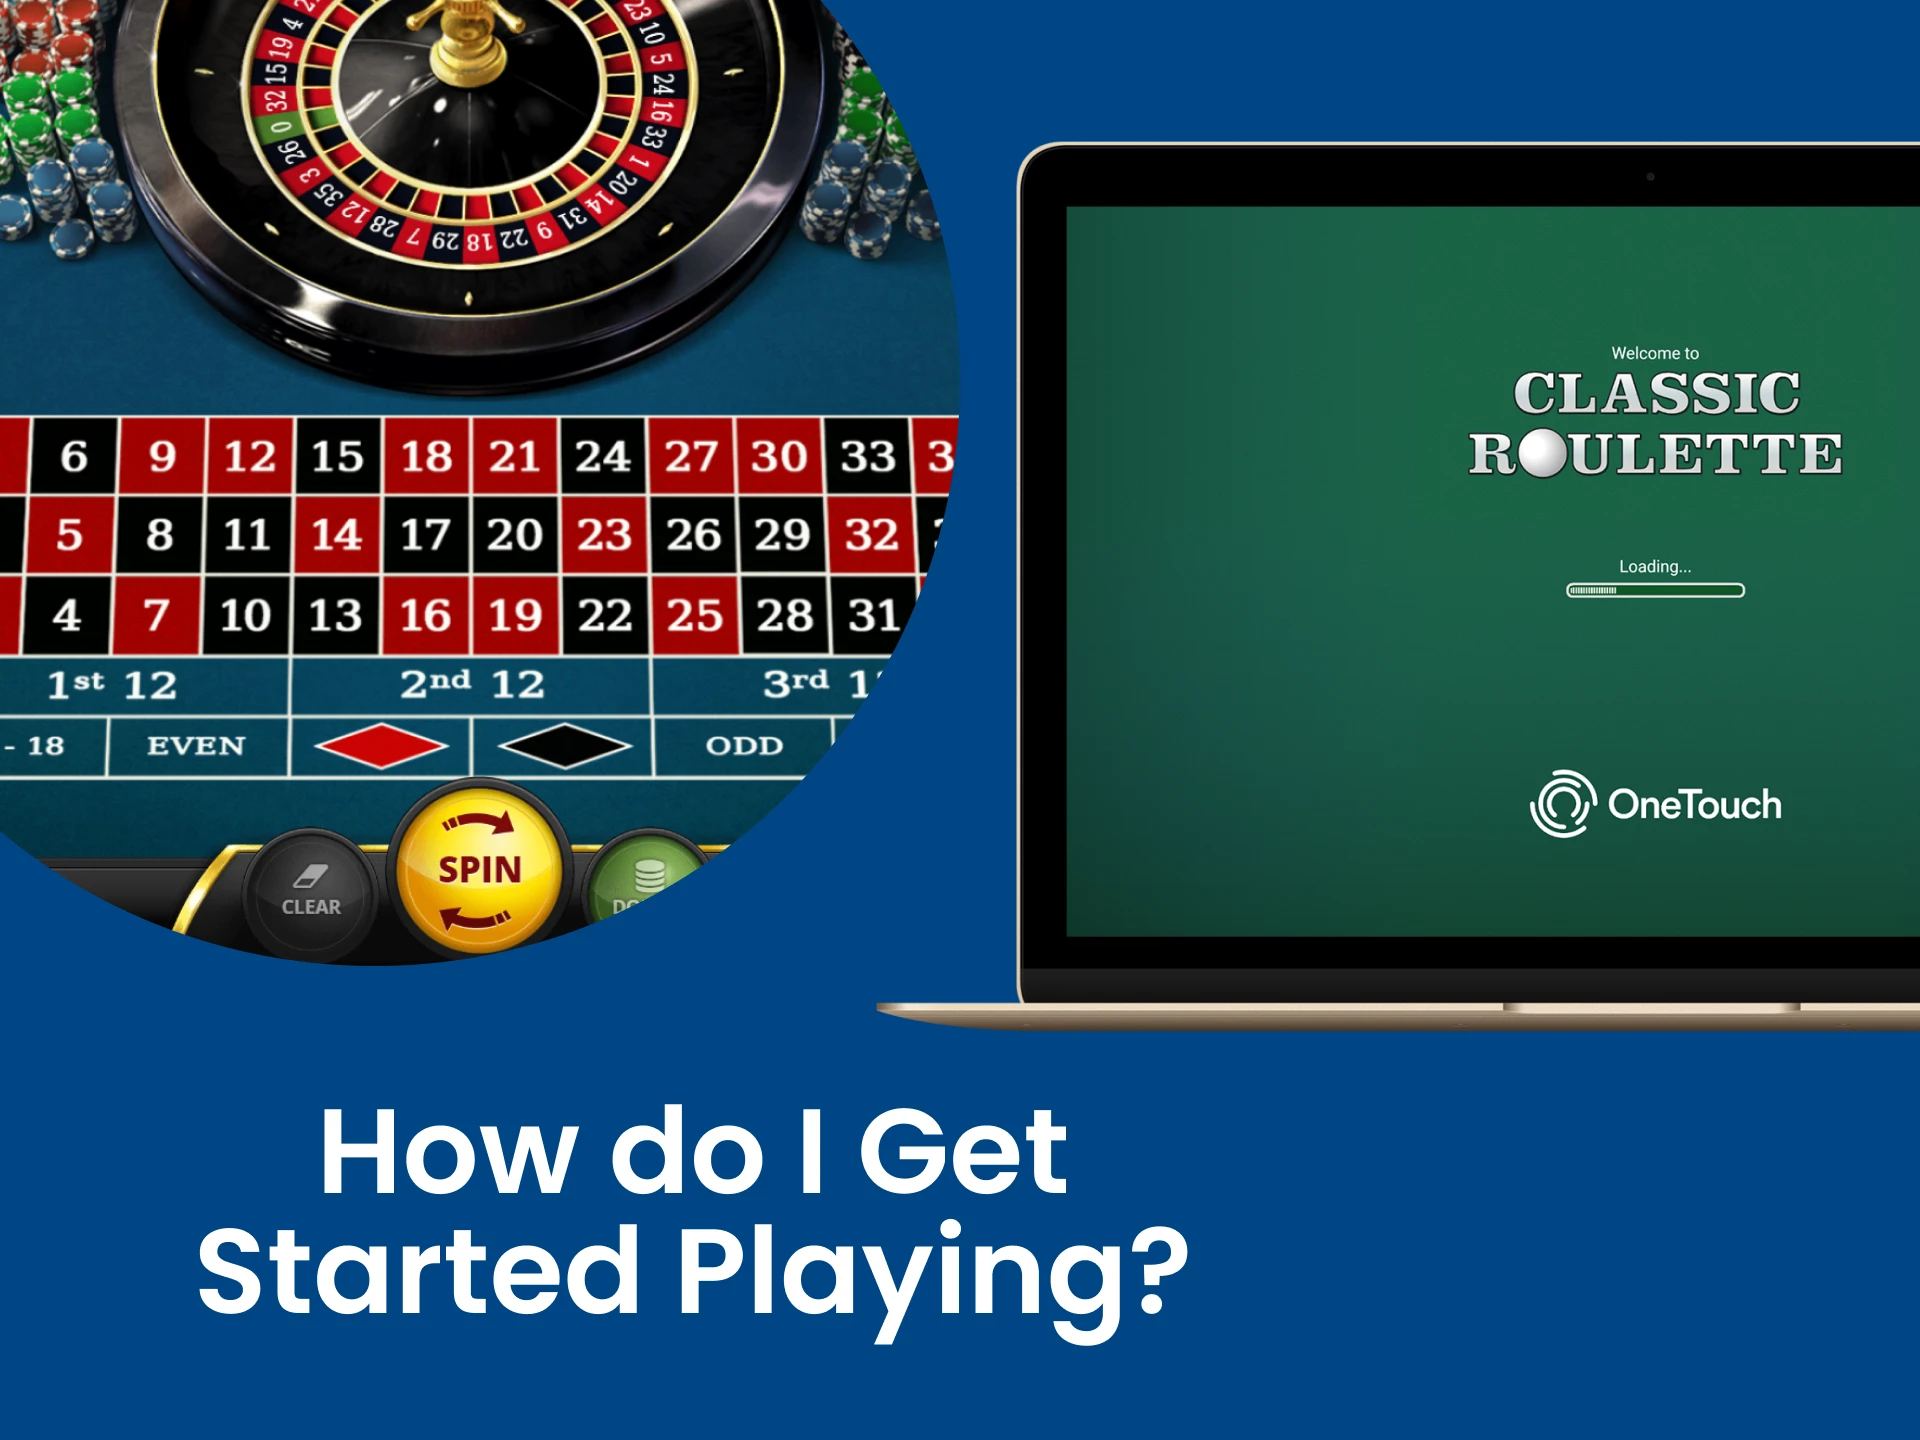 We will tell you how to start playing roulette.